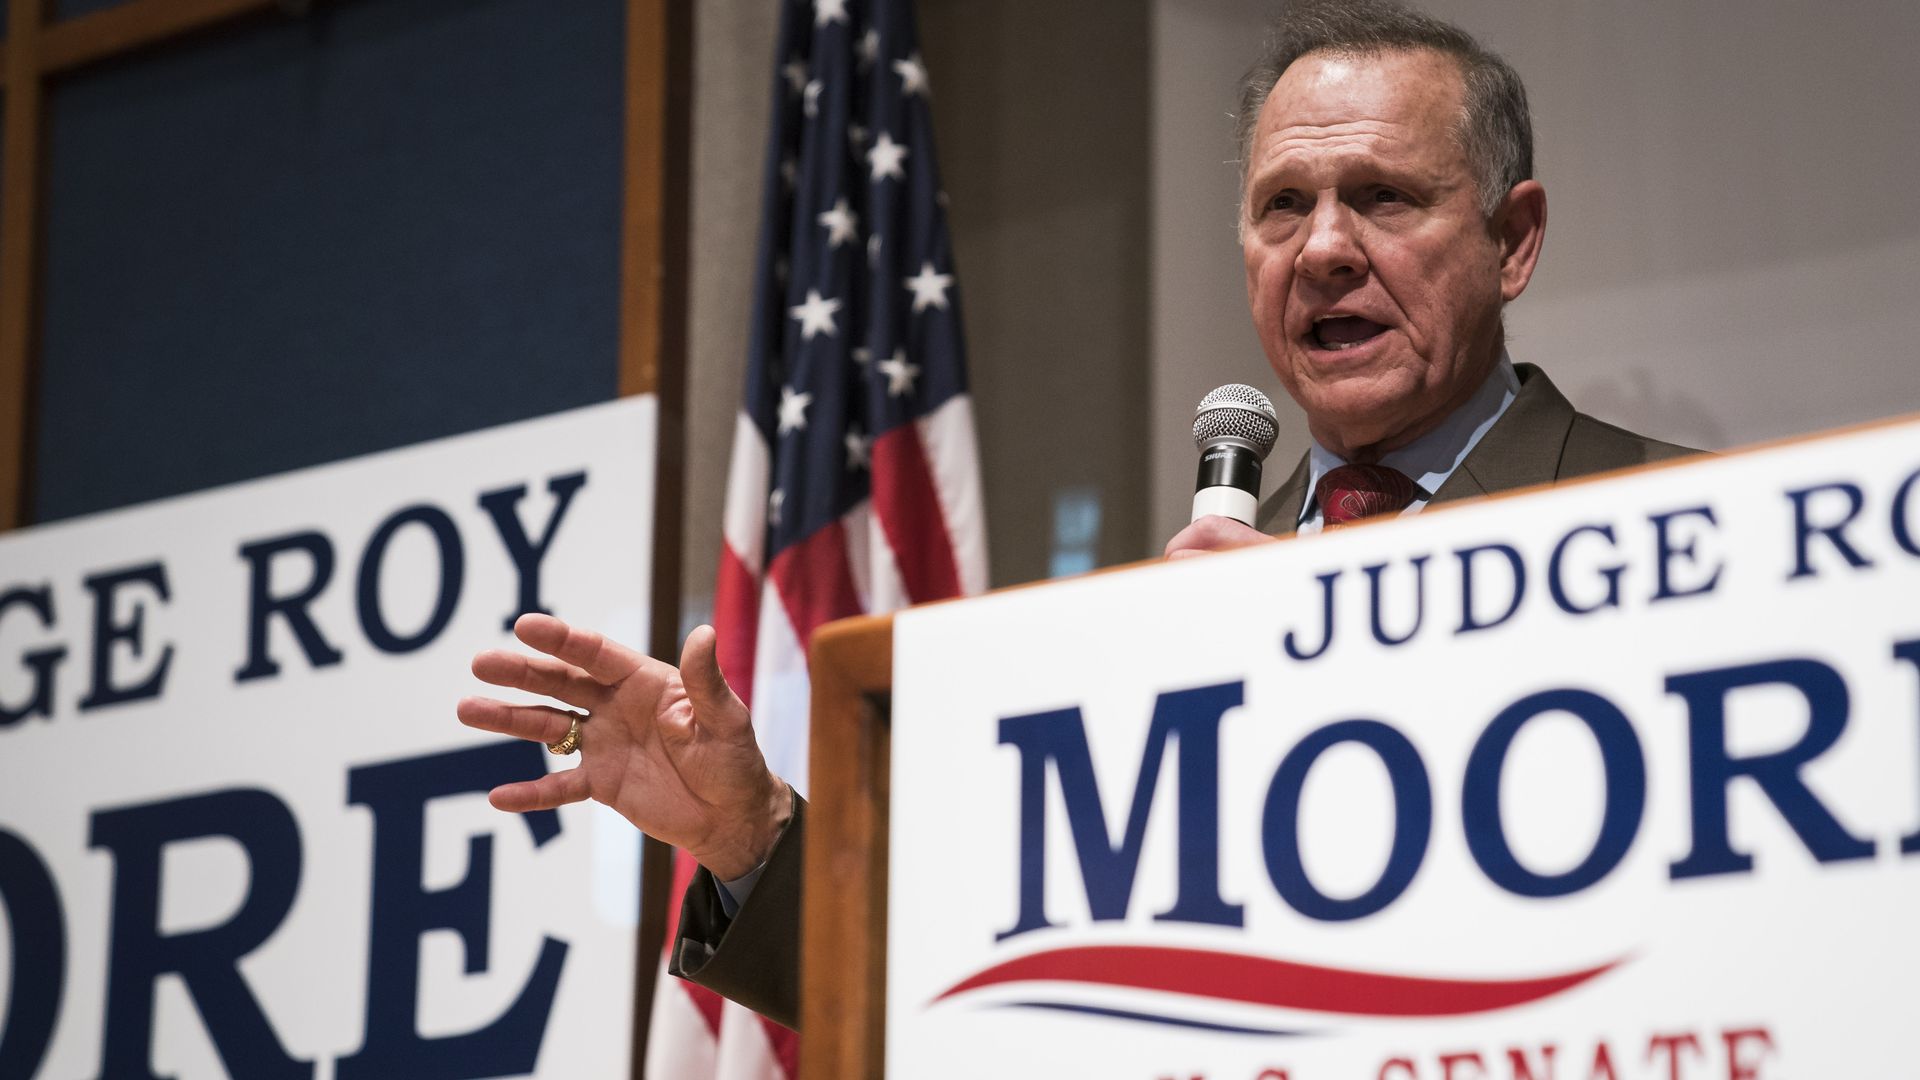 Roy Moore campaigning for senate